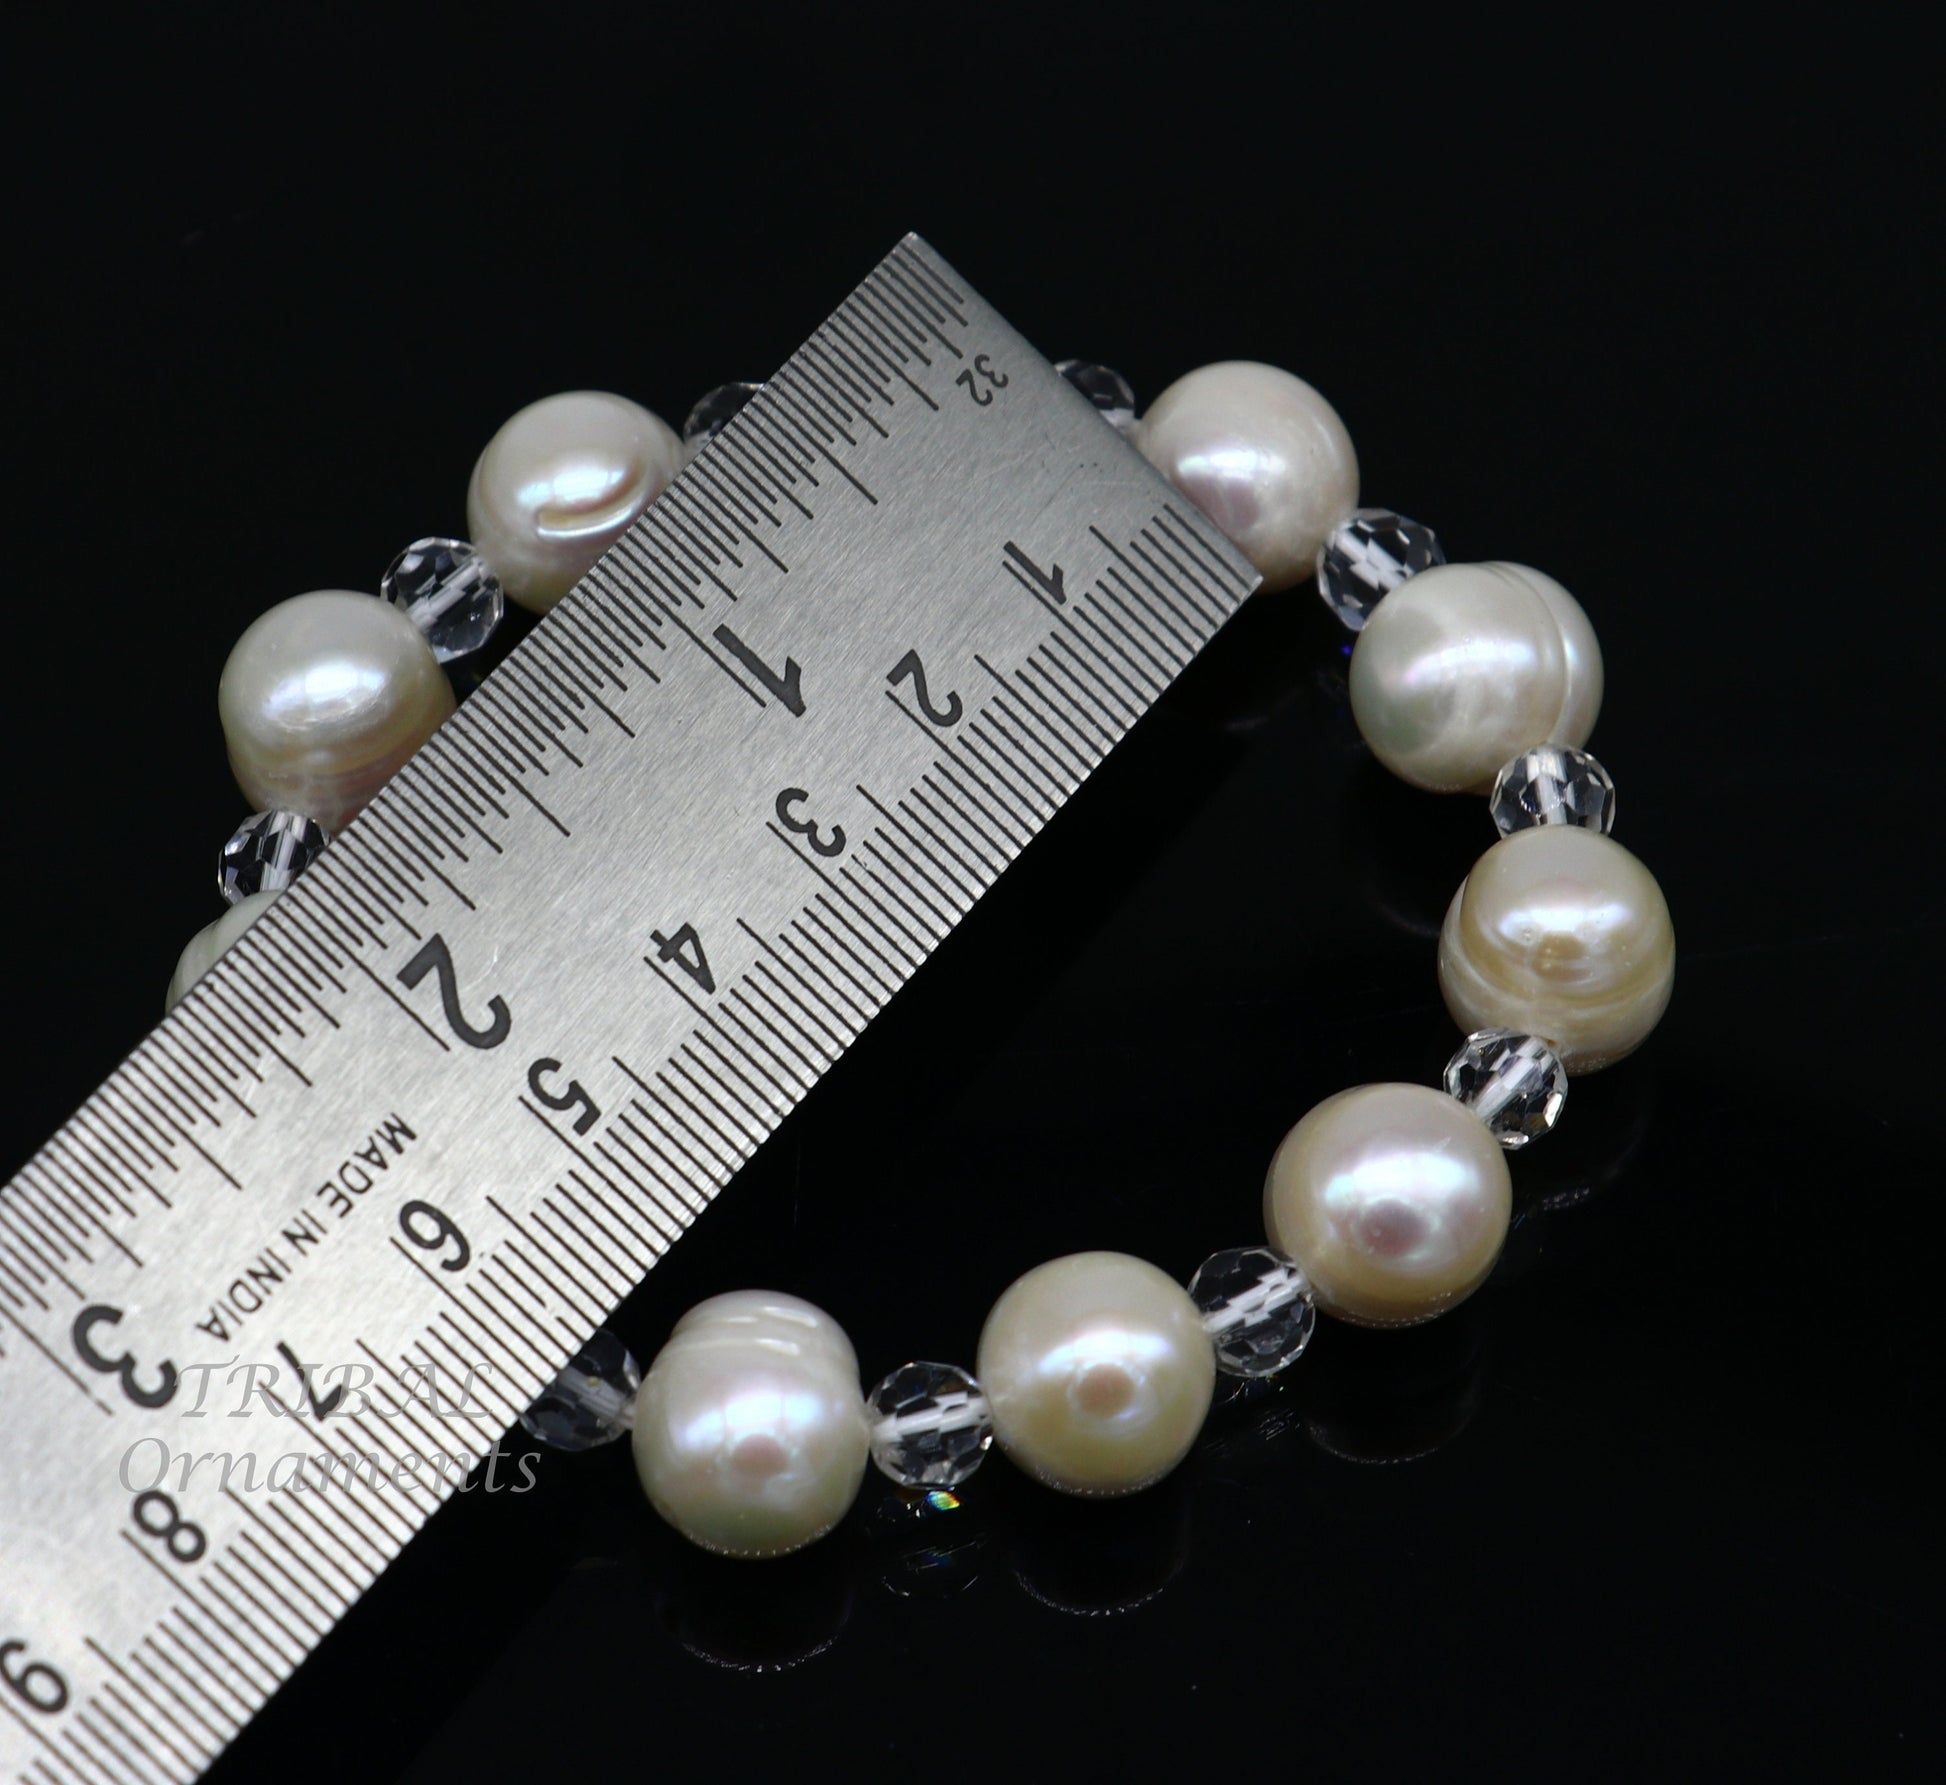 141carat 11mm fresh water pearl adjustable bracelet for both men's and women's, Amazing natural real gray color pearl or moti bracelet pbr03 - TRIBAL ORNAMENTS